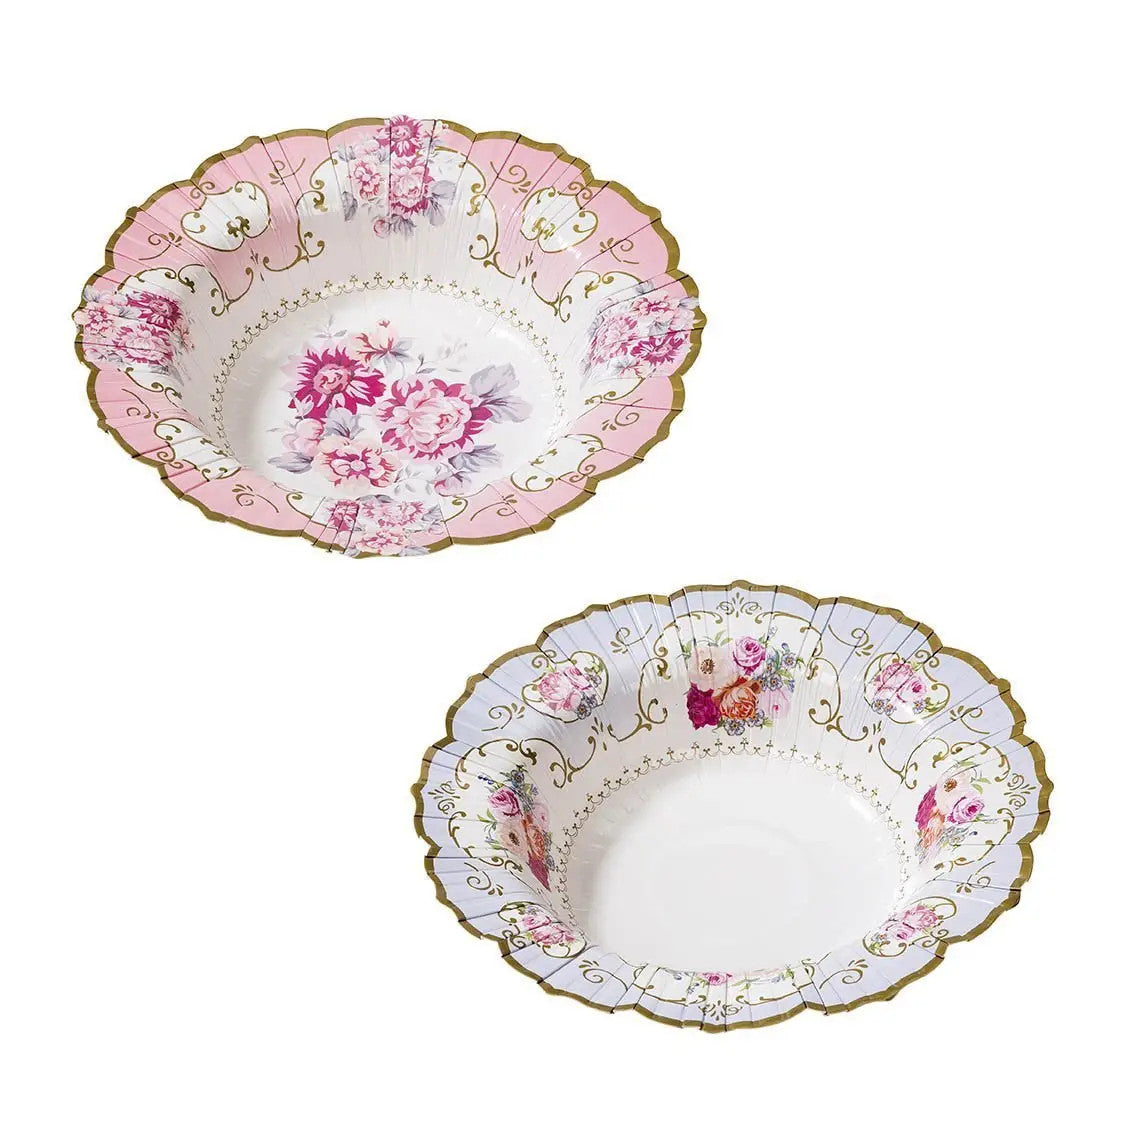 Truly Scrumptious Floral Paper Bowls - 12 pack 